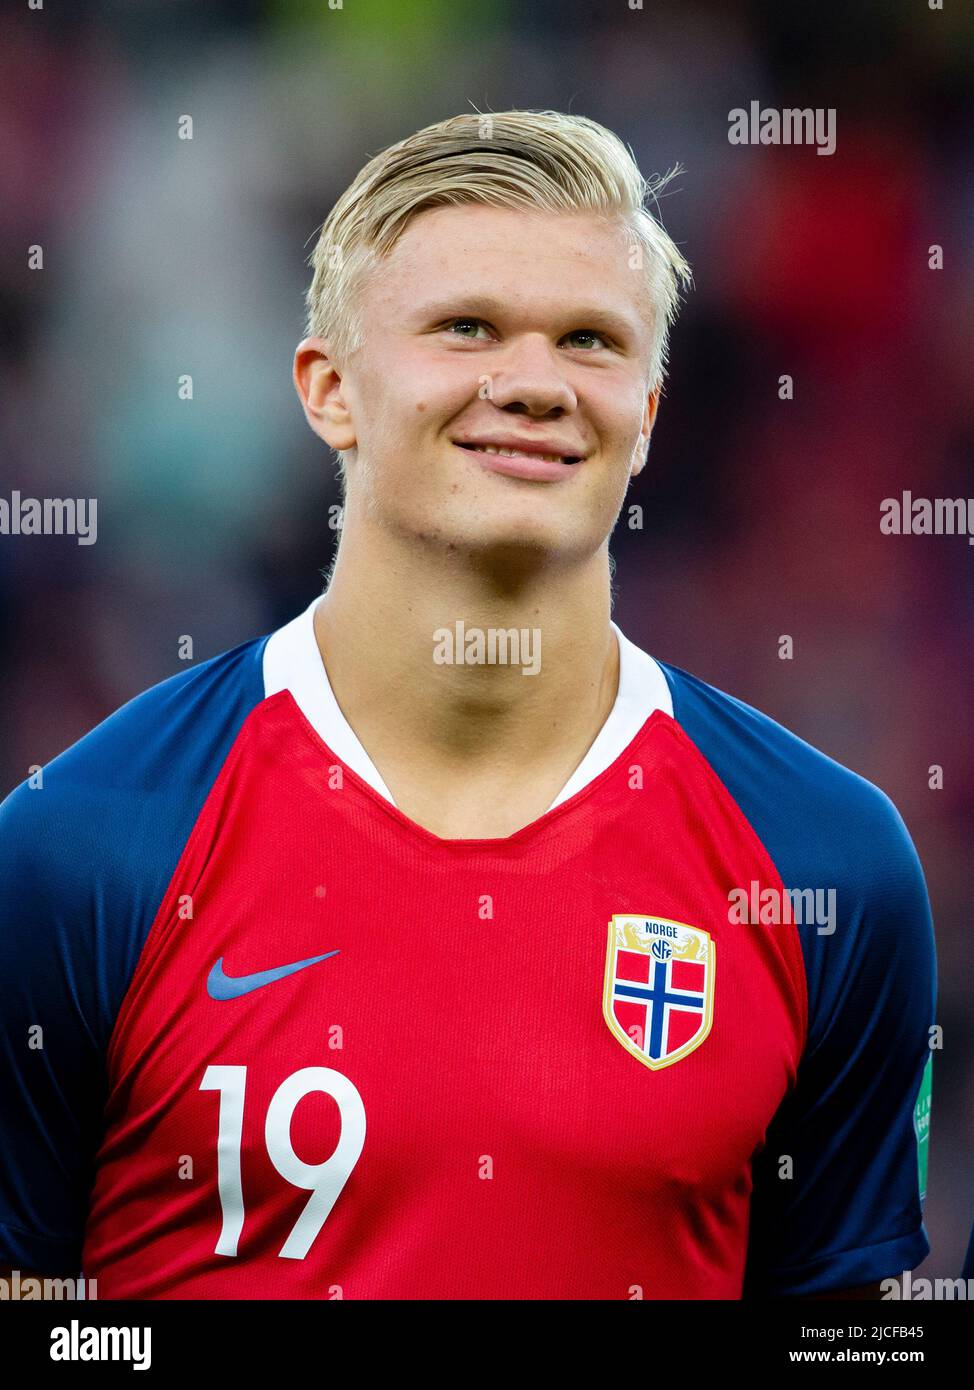 Erling Braut Haaland during FIFA U-20 World Cup in 2019 Stock Photo - Alamy